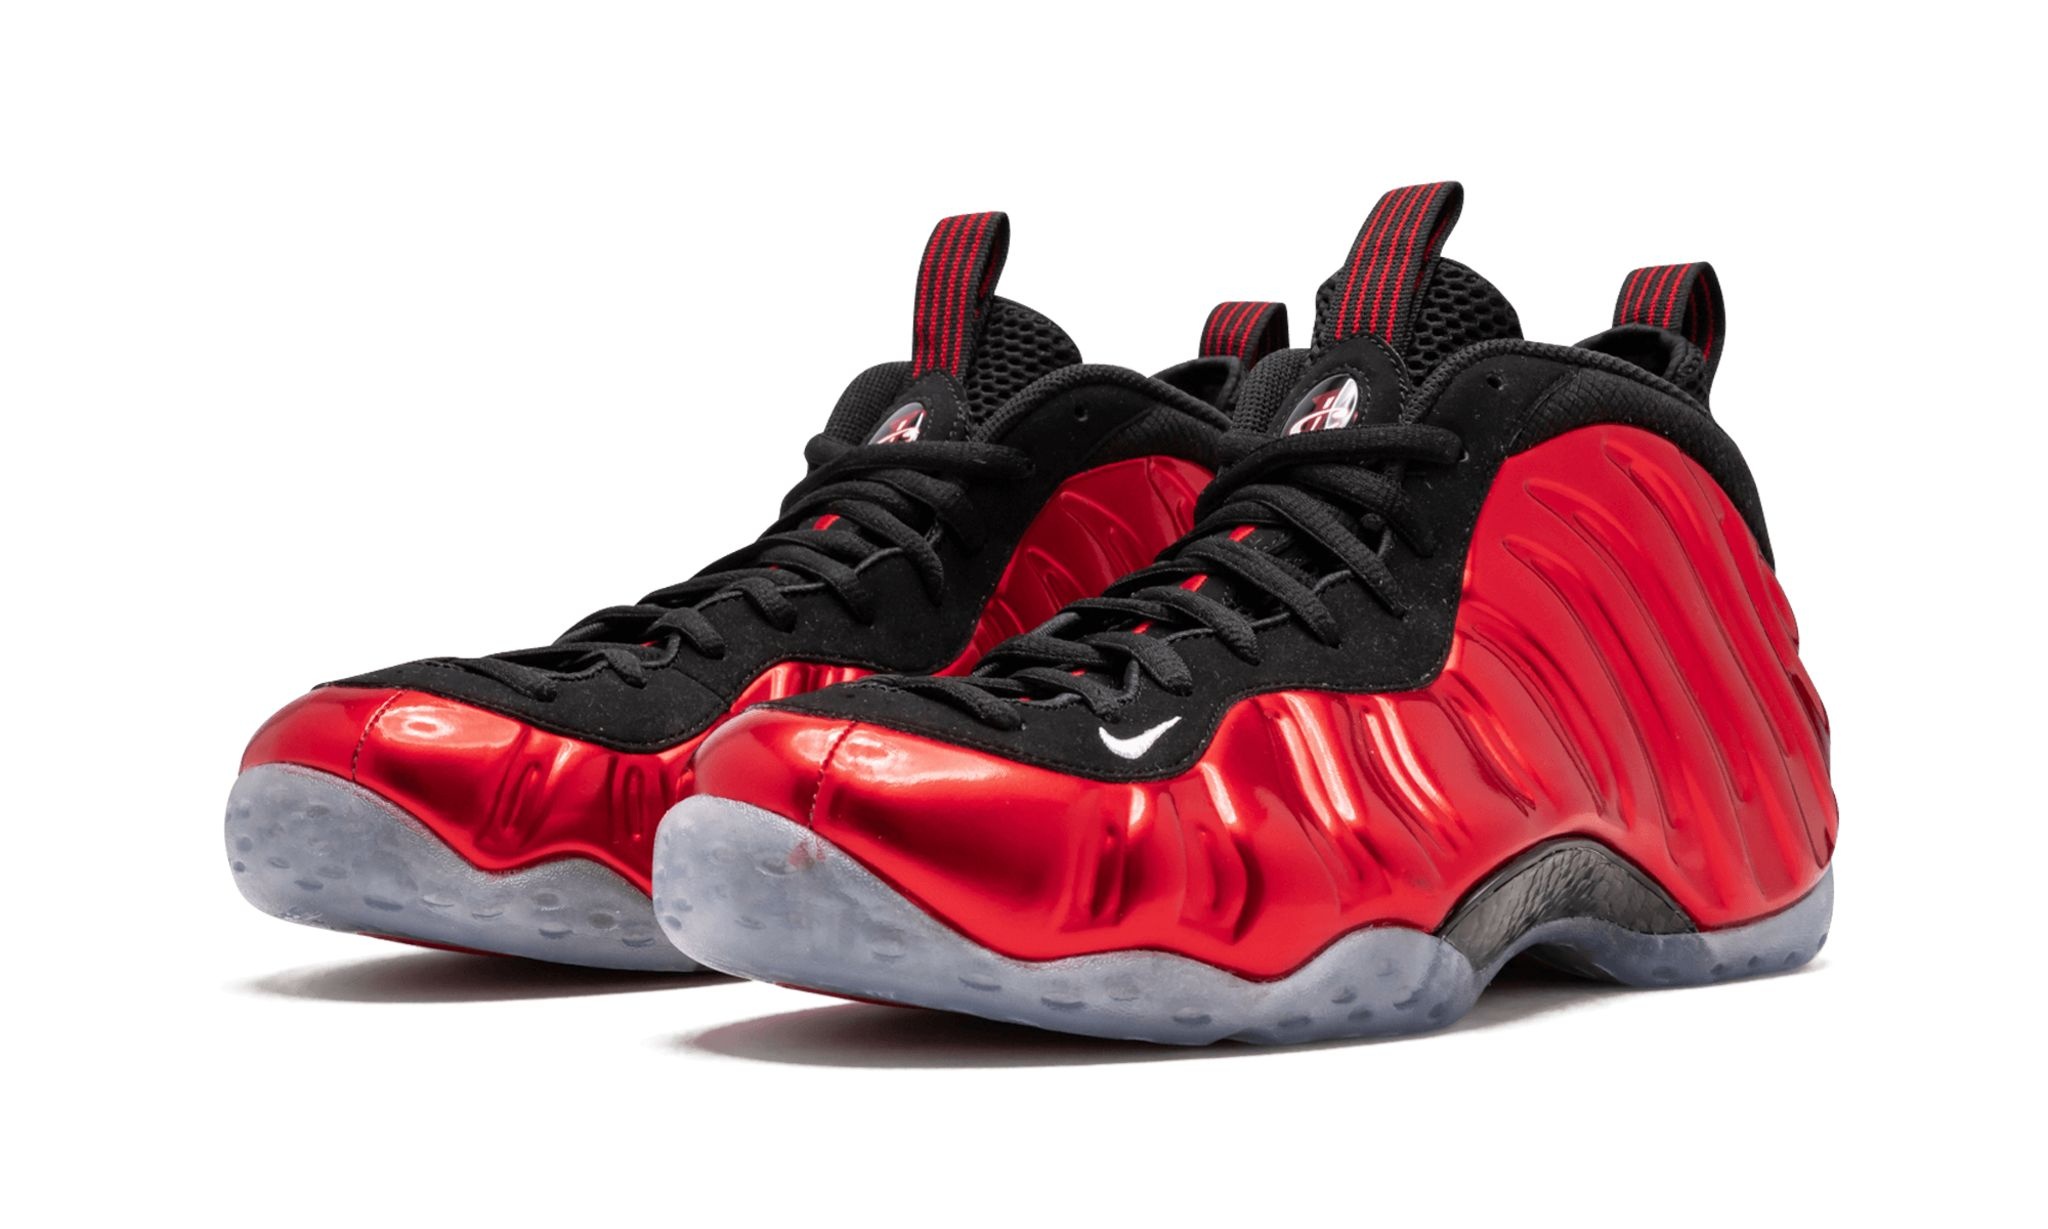 Air Foamposite One "Metallic Red" - 2